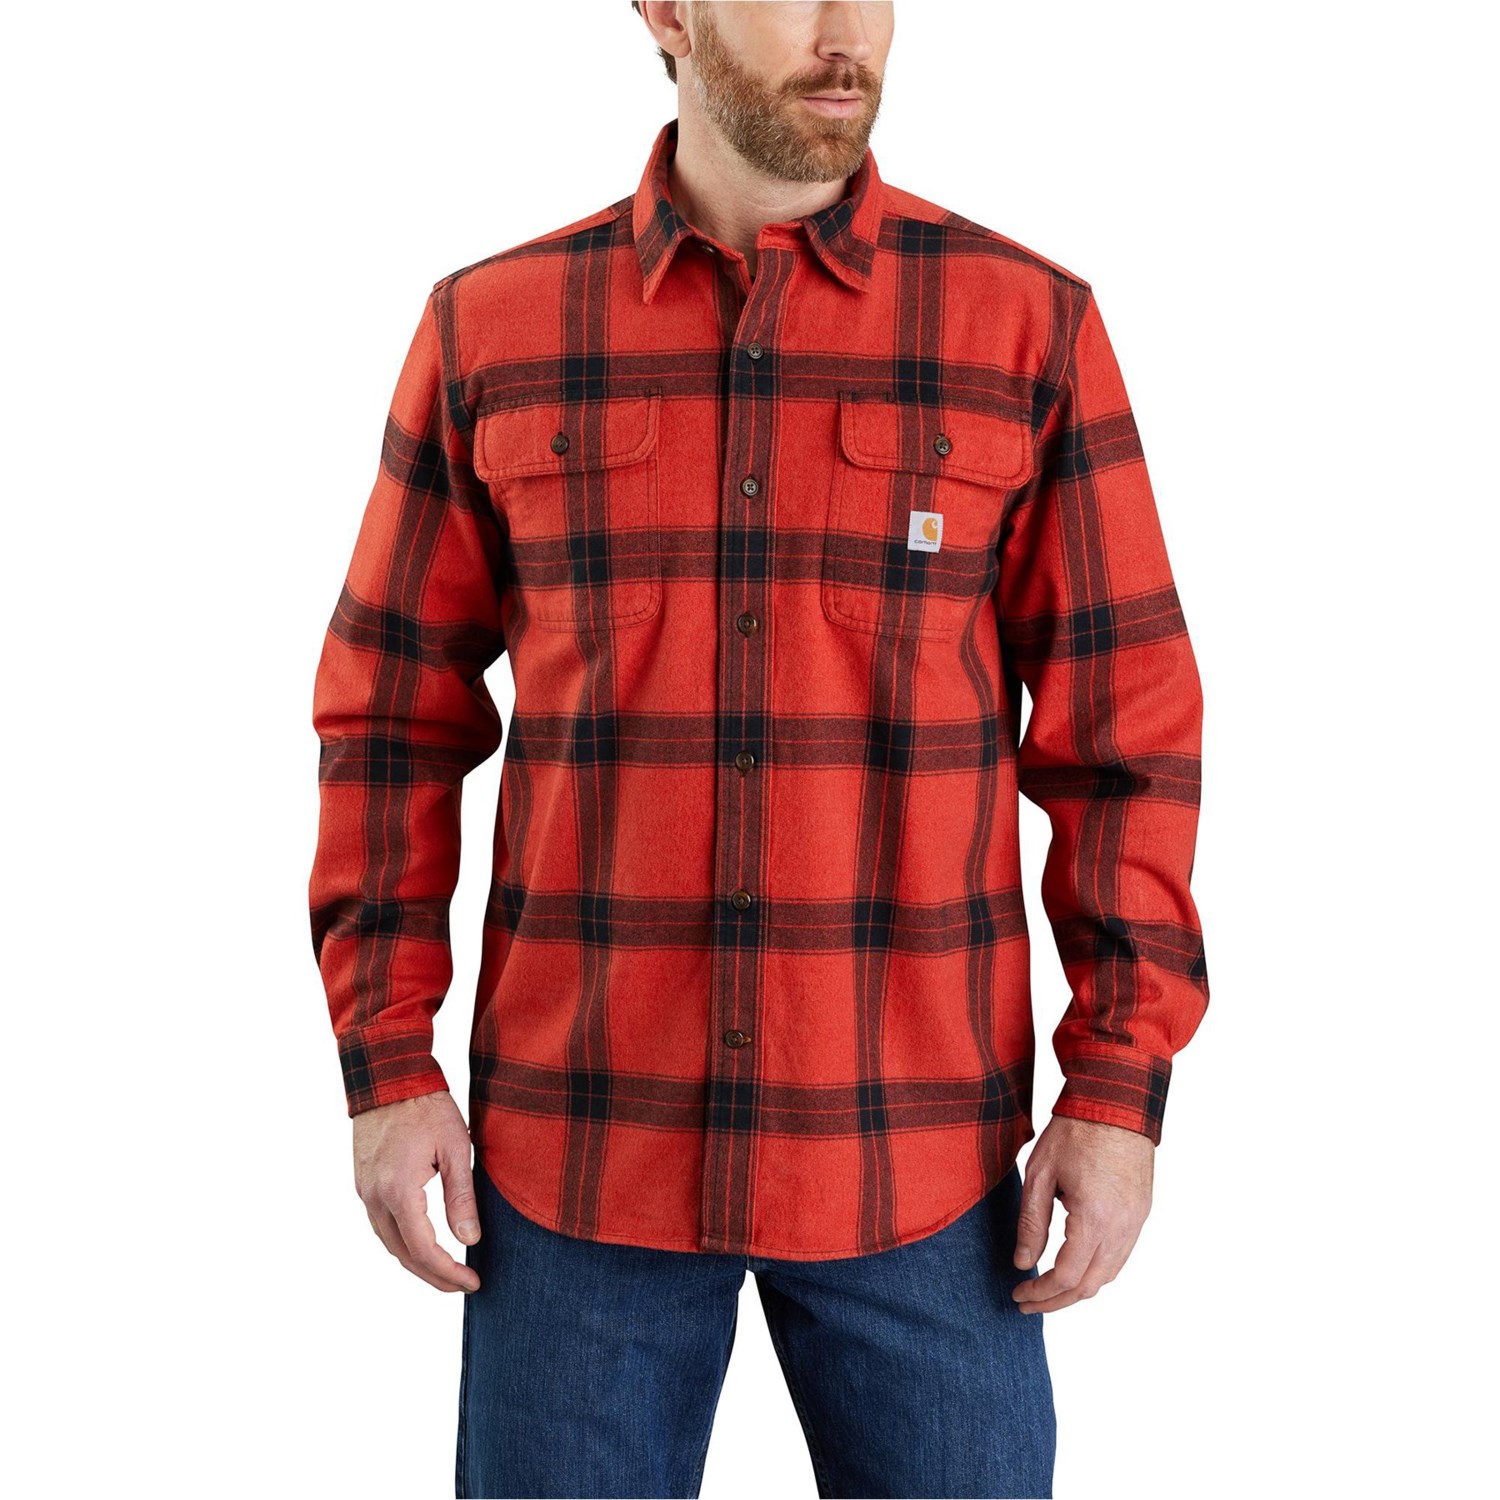 Men's Detroit Red Wings Red Flannel Long Sleeve T-Shirt